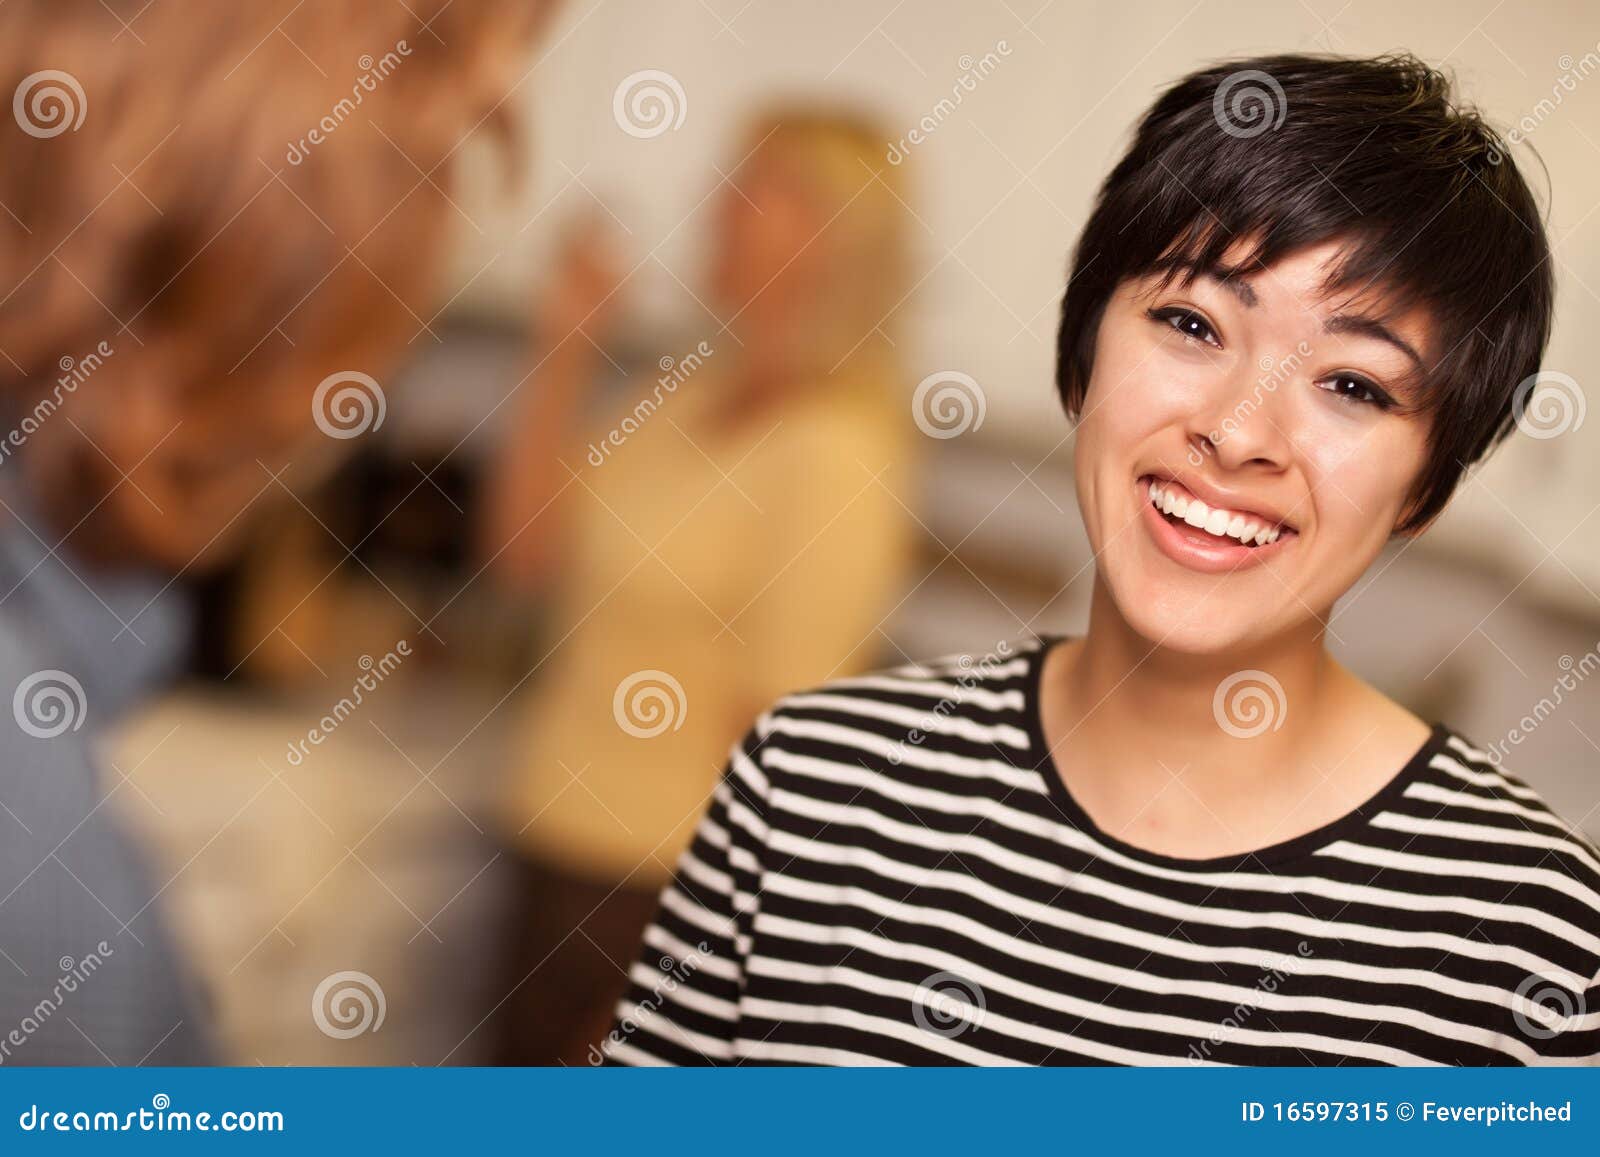 laughing young woman socializing